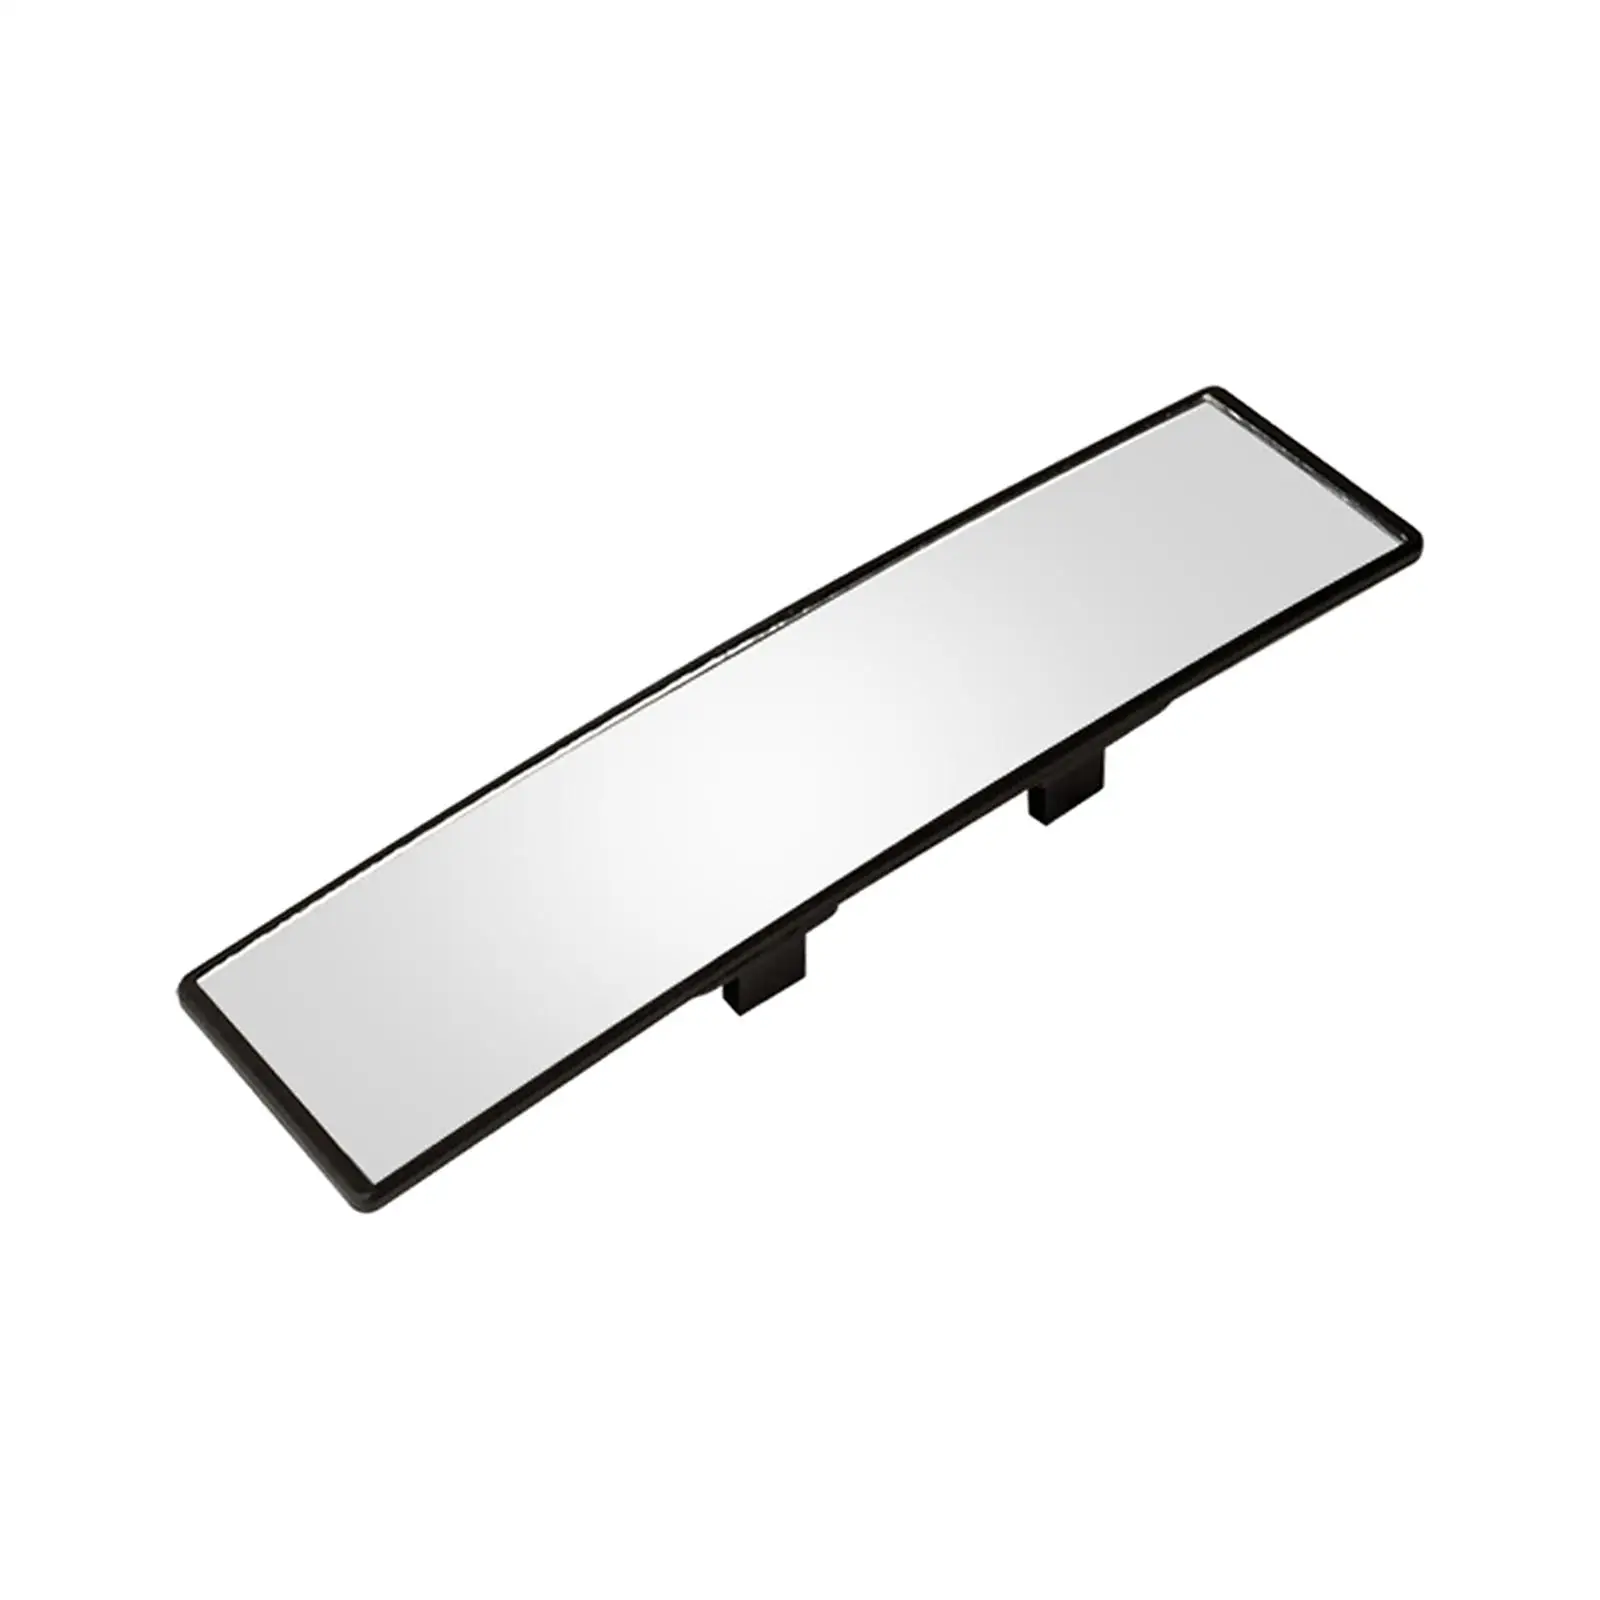 Rear View Mirror Glass Panoramic Rearview Mirror for Automobile SUV Car